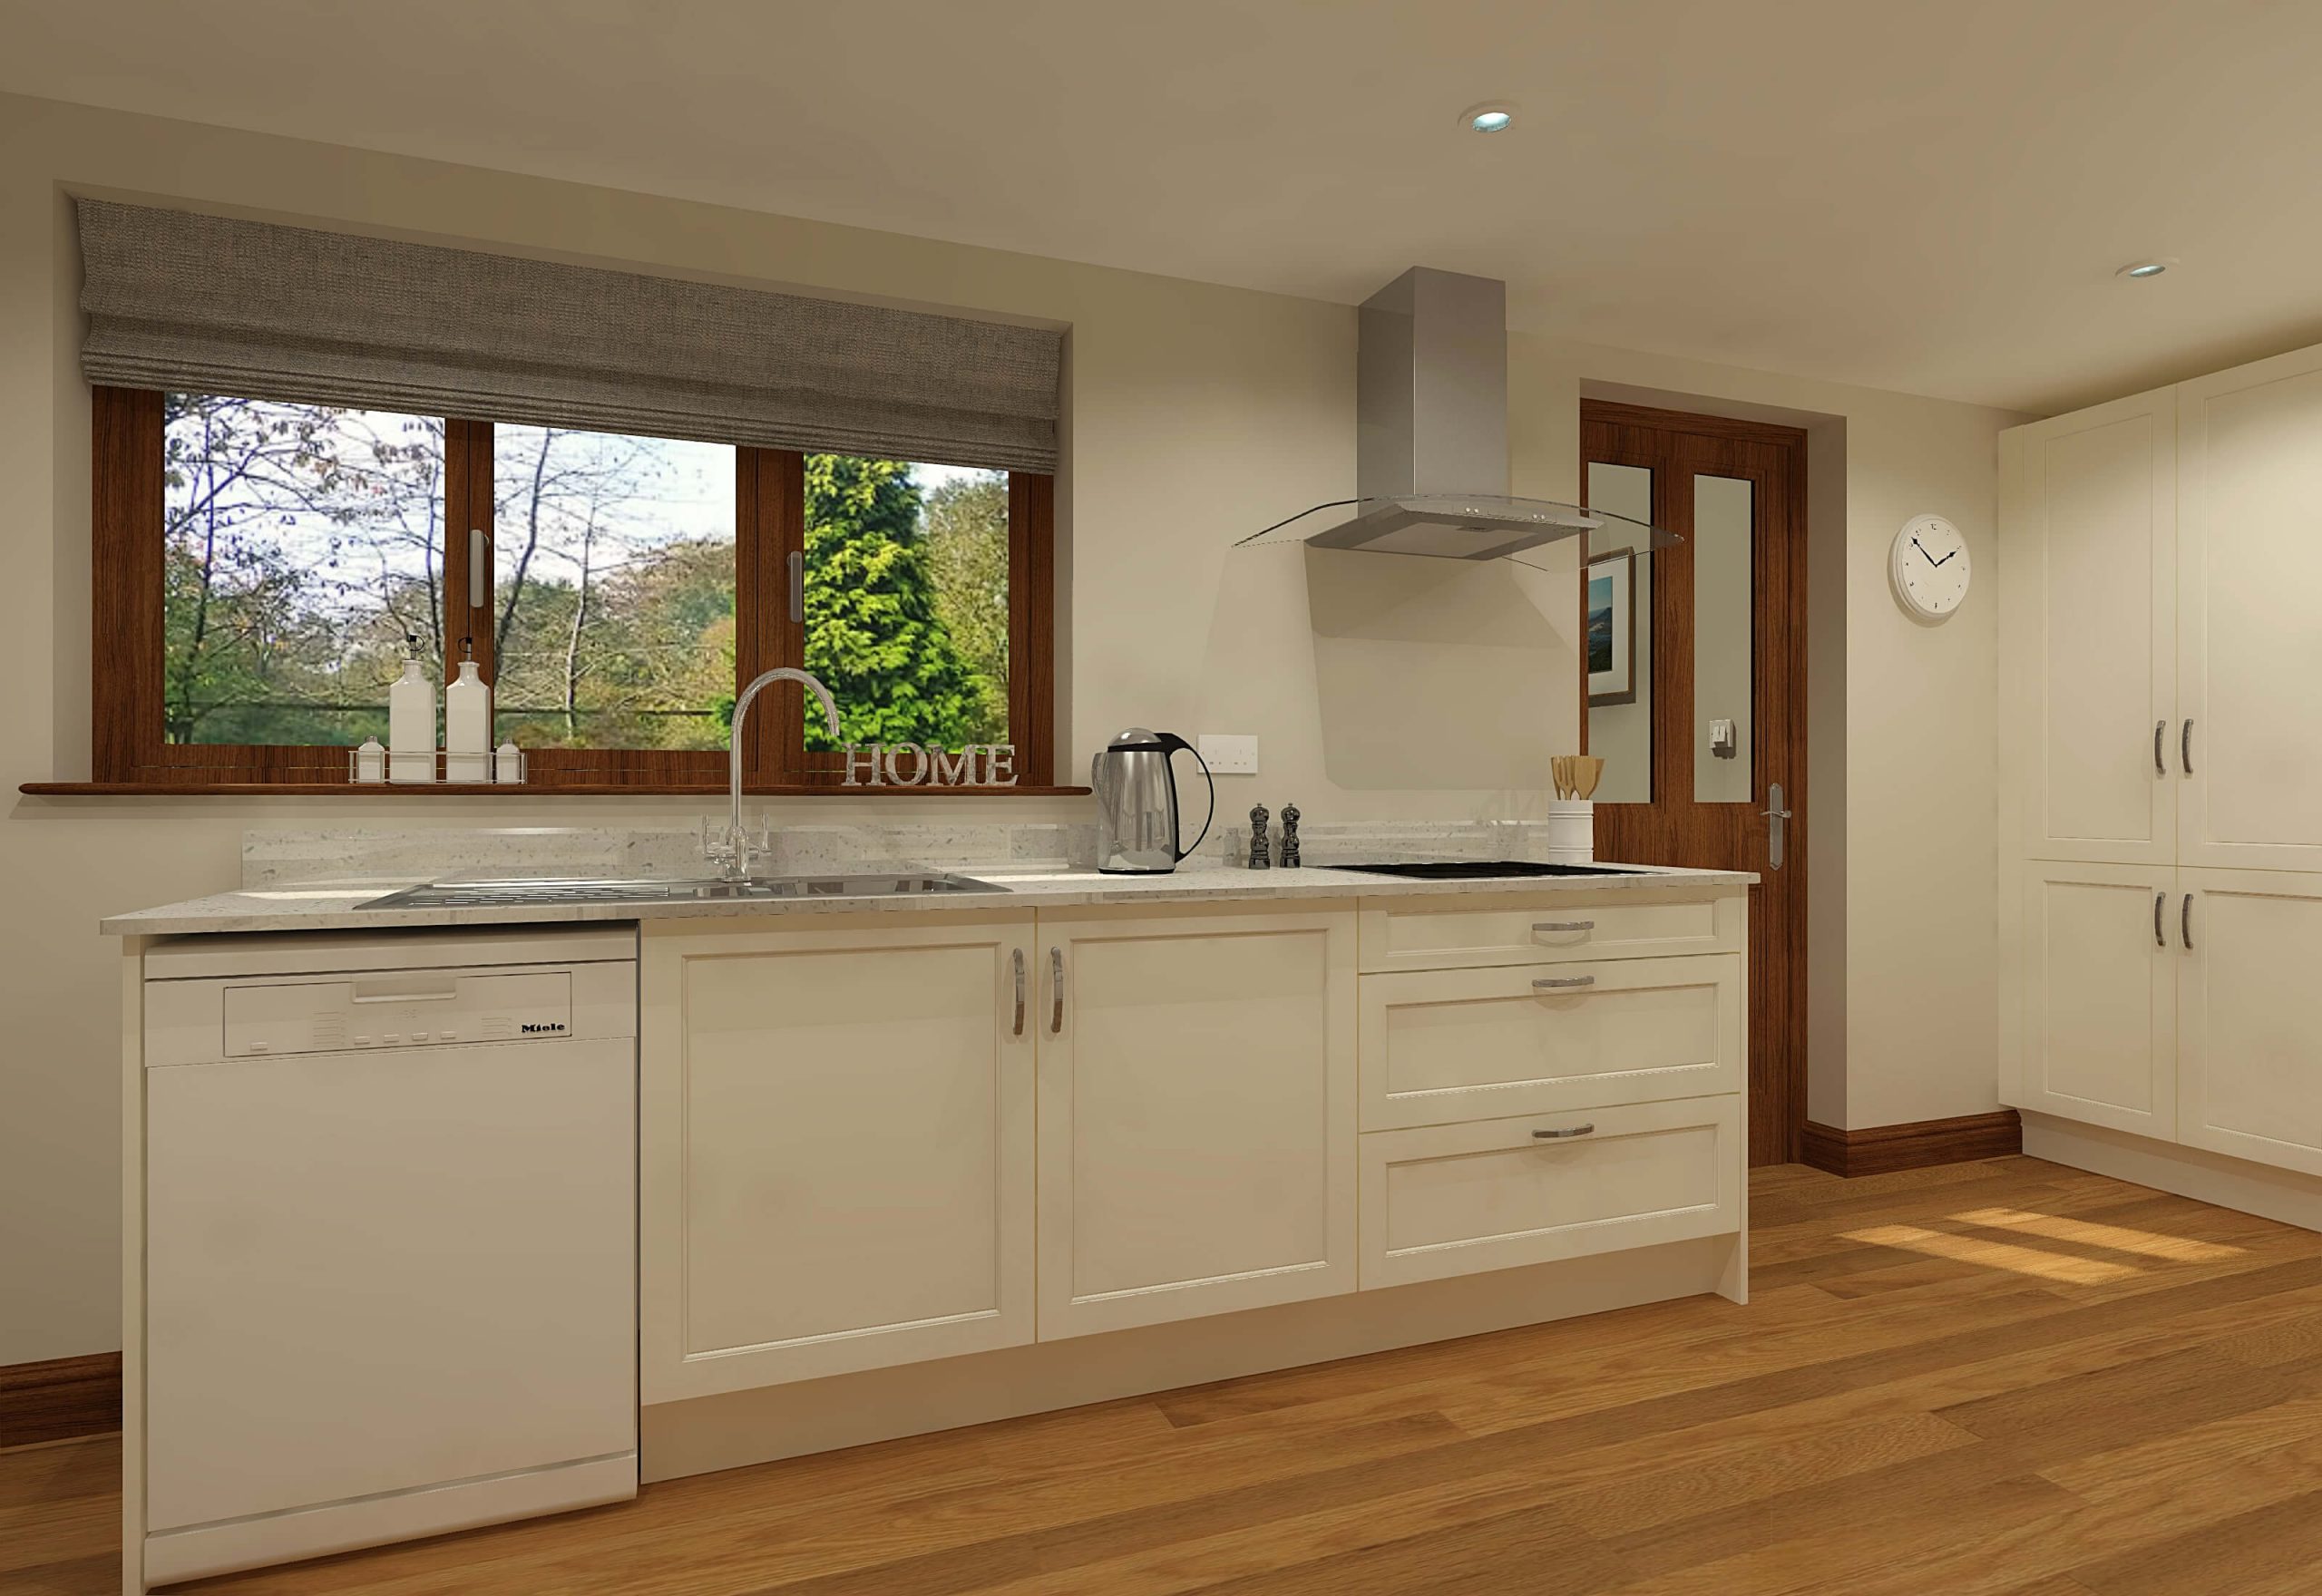 View 3 of a Cream Shaker Kitchen